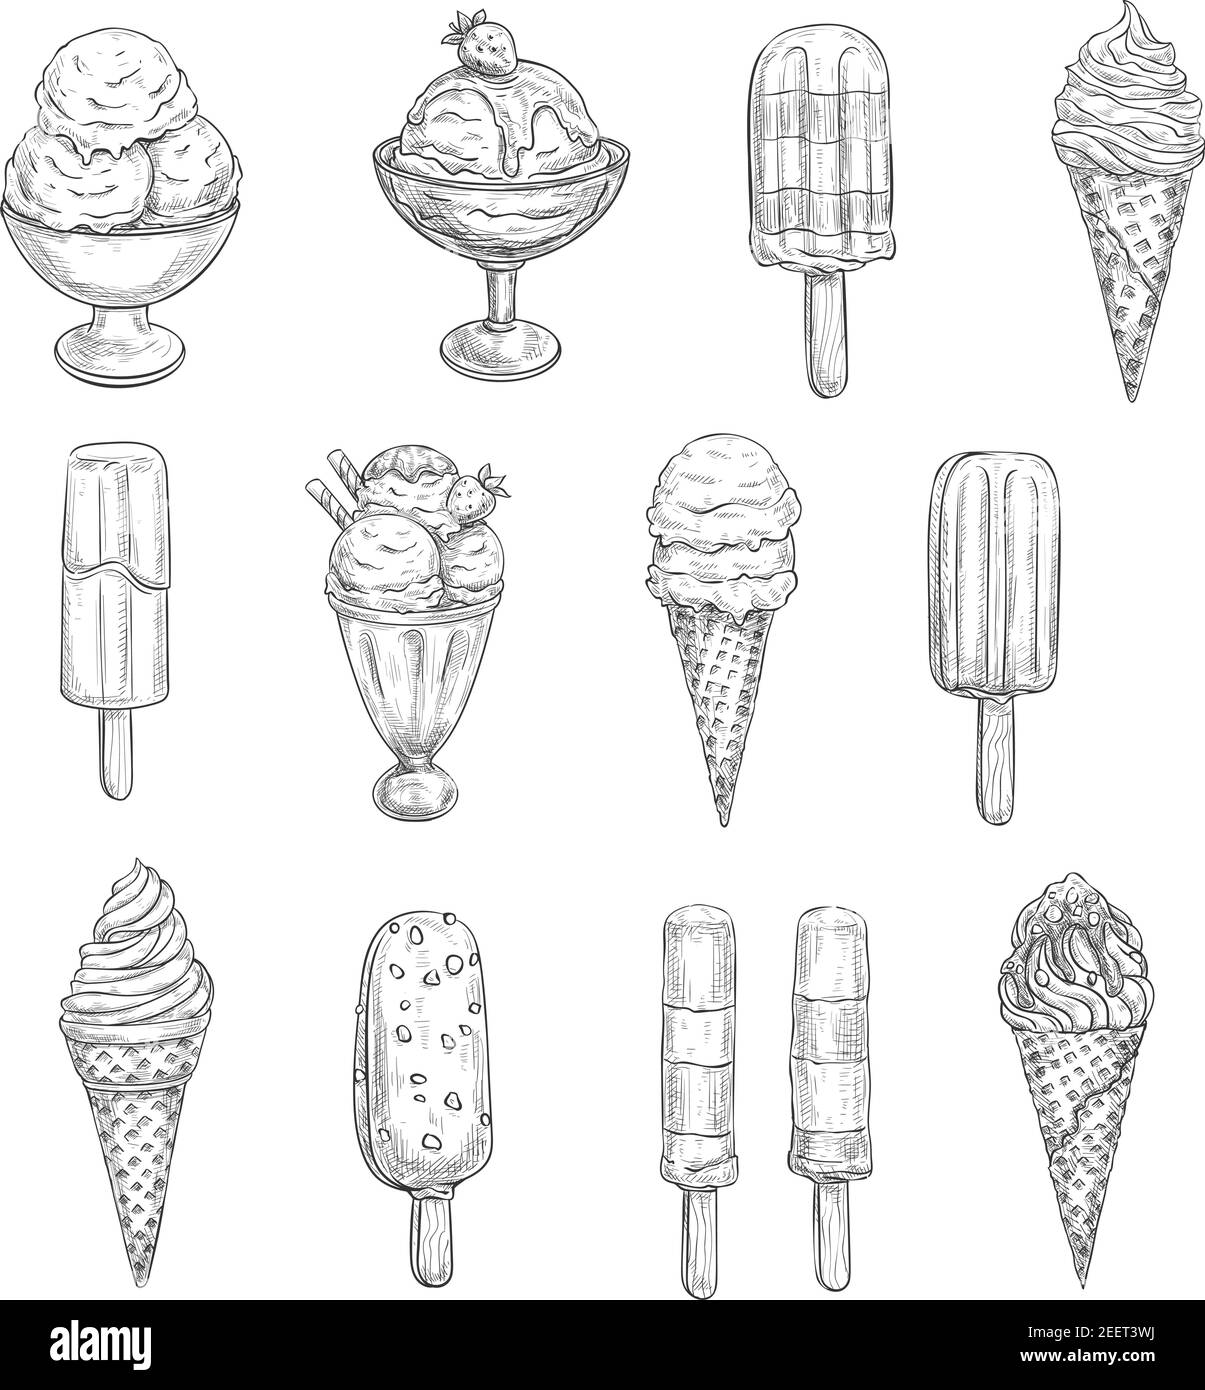 Ice cream sketch vector icons. Isolated set of frozen desserts, fruit or berry soft ice cream scoops in wafer cones, chocolate glaze sundae or berry s Stock Vector